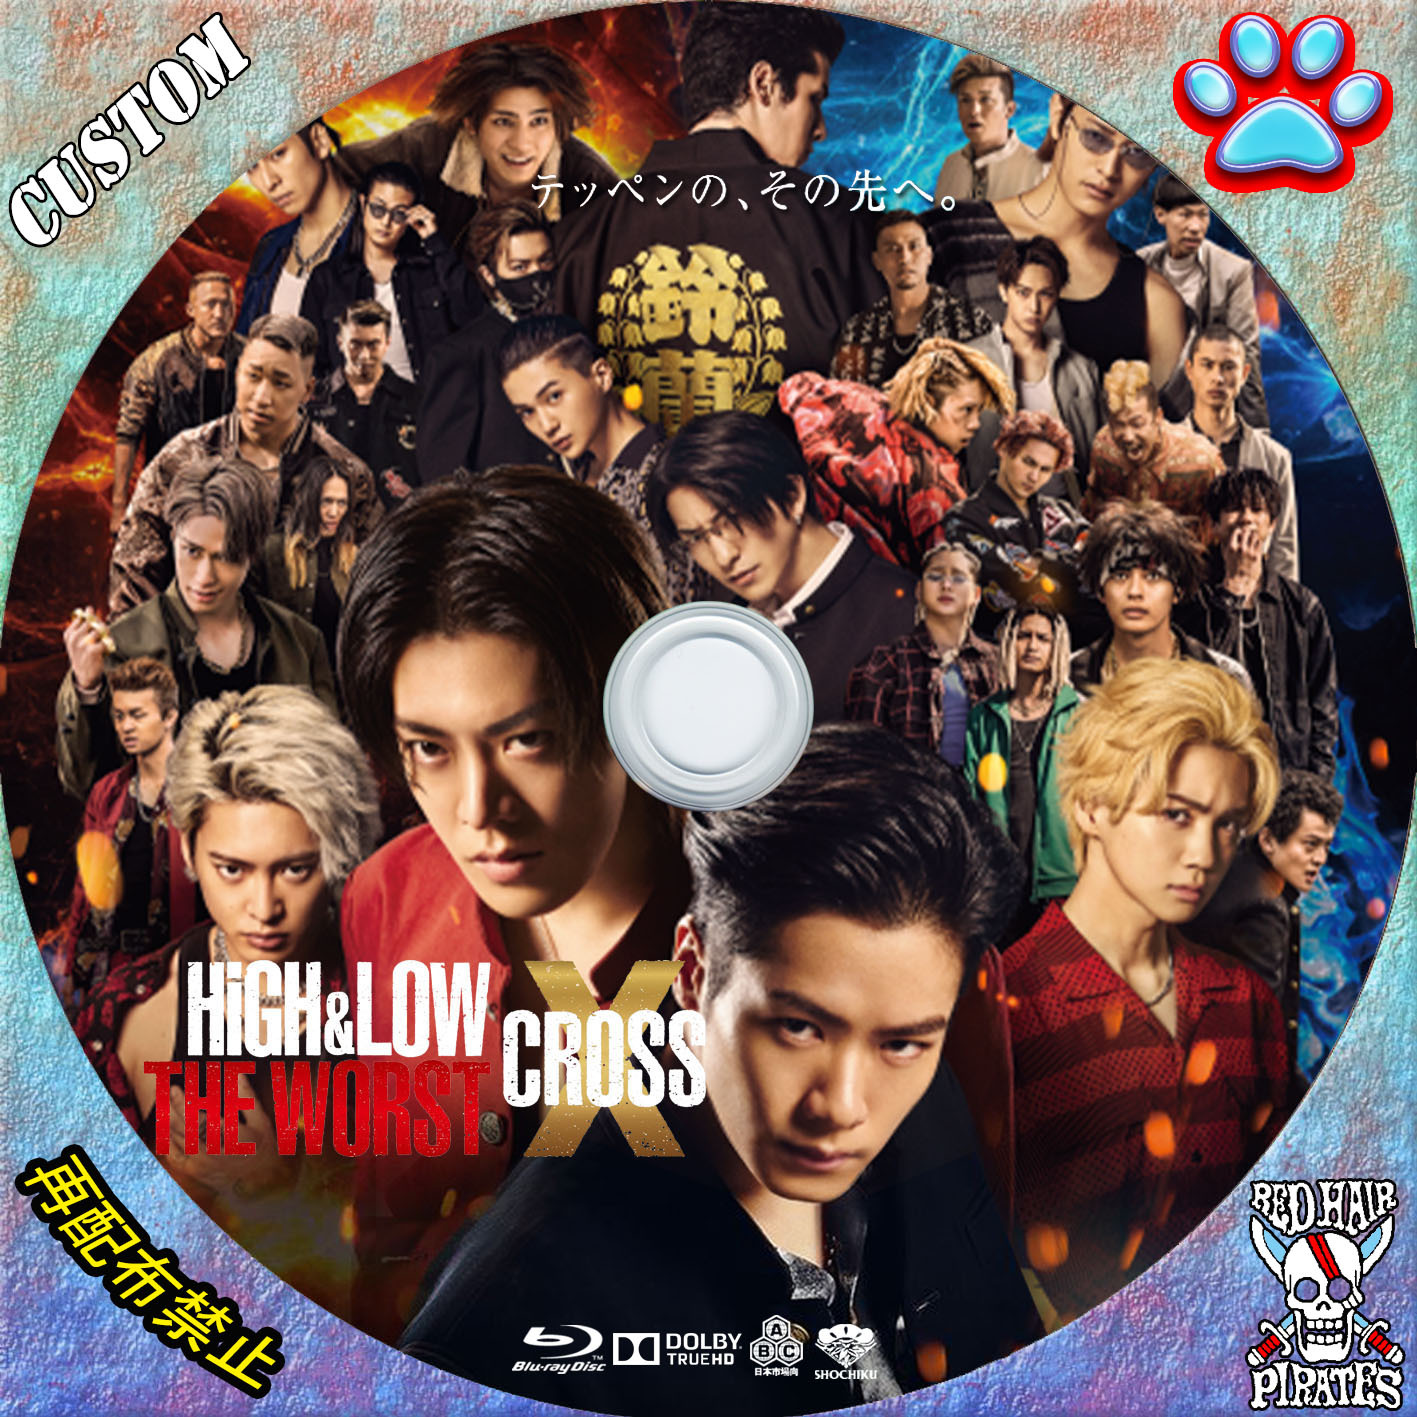 High＆low The Worst Xdvd 通販 2093